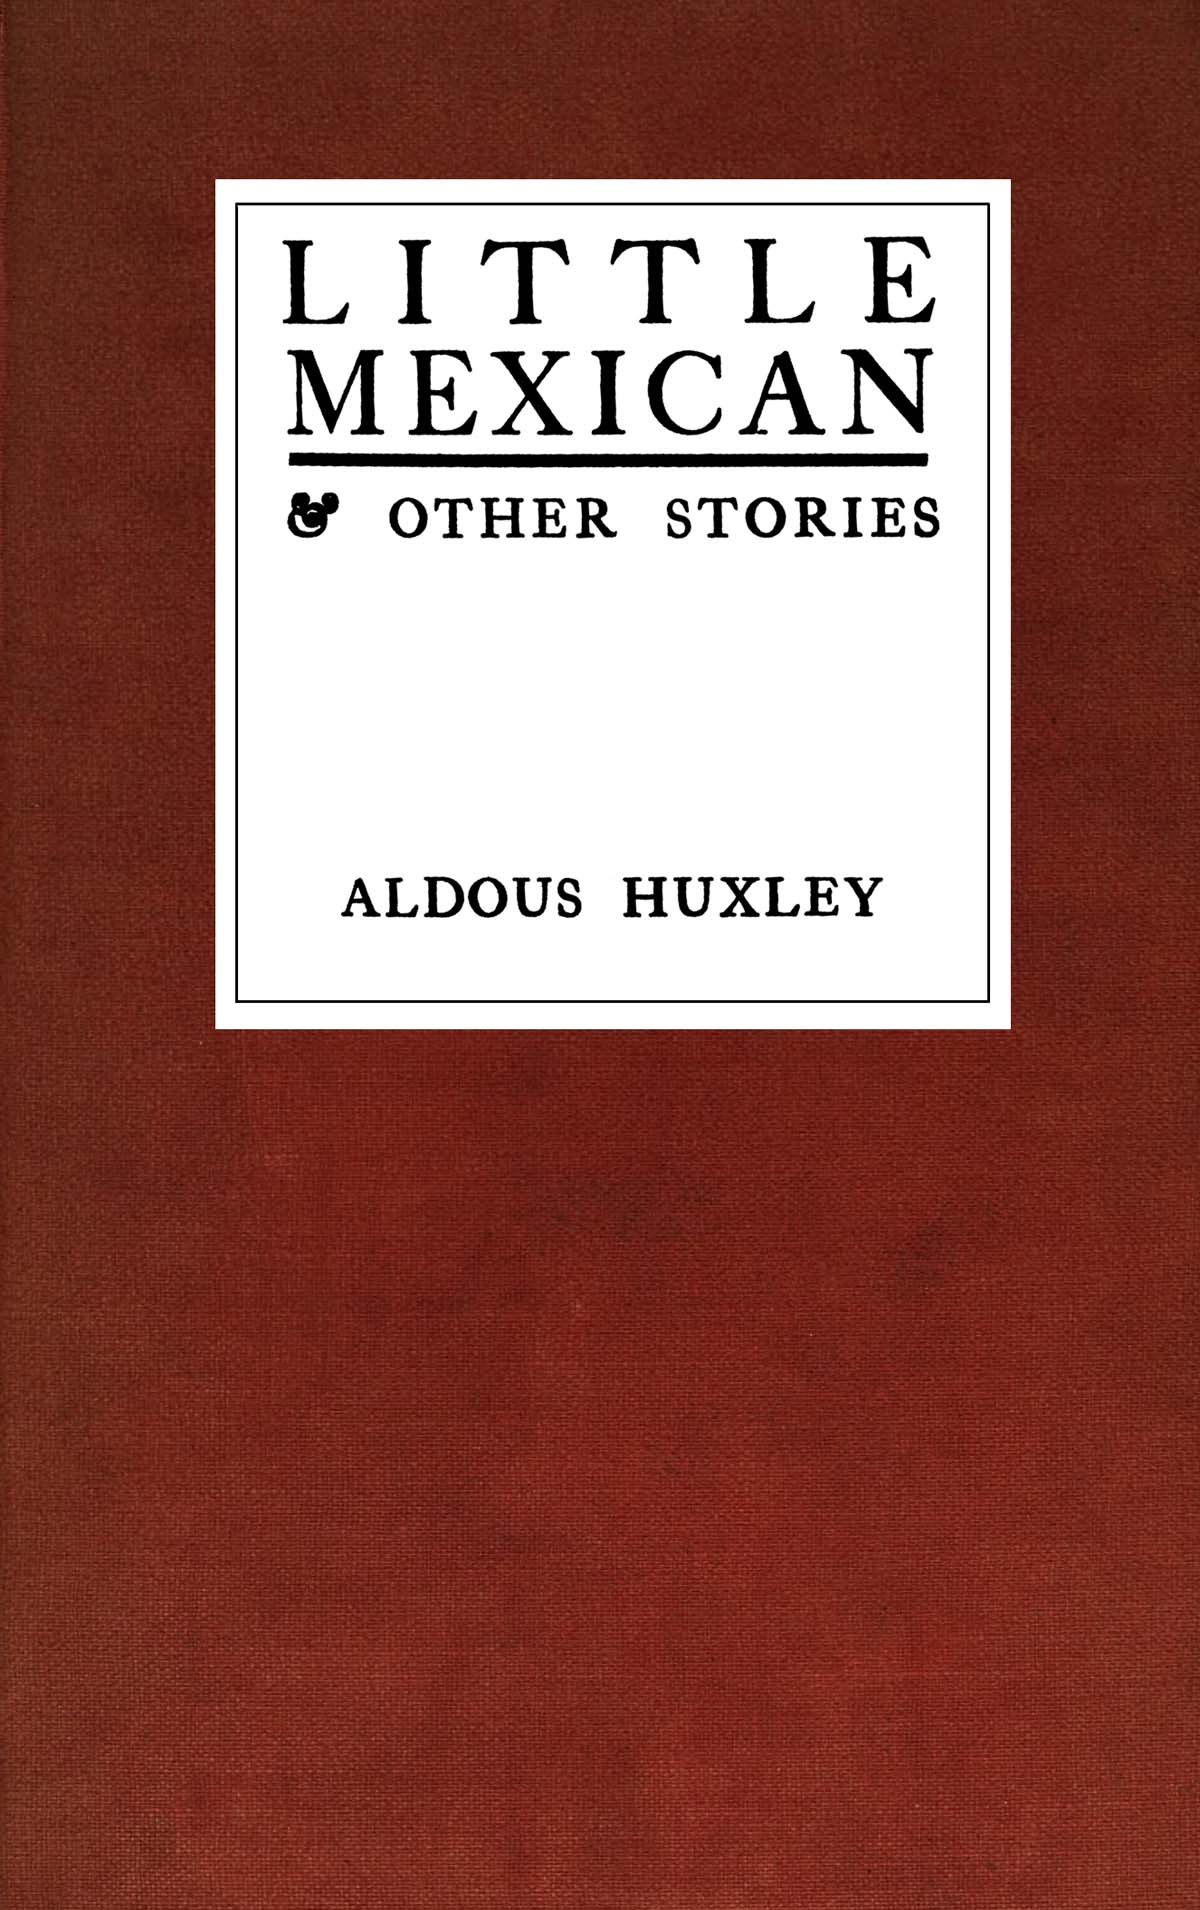 Little Mexican and Other Stories, by Aldous Huxley—A Project Gutenberg eBook pic